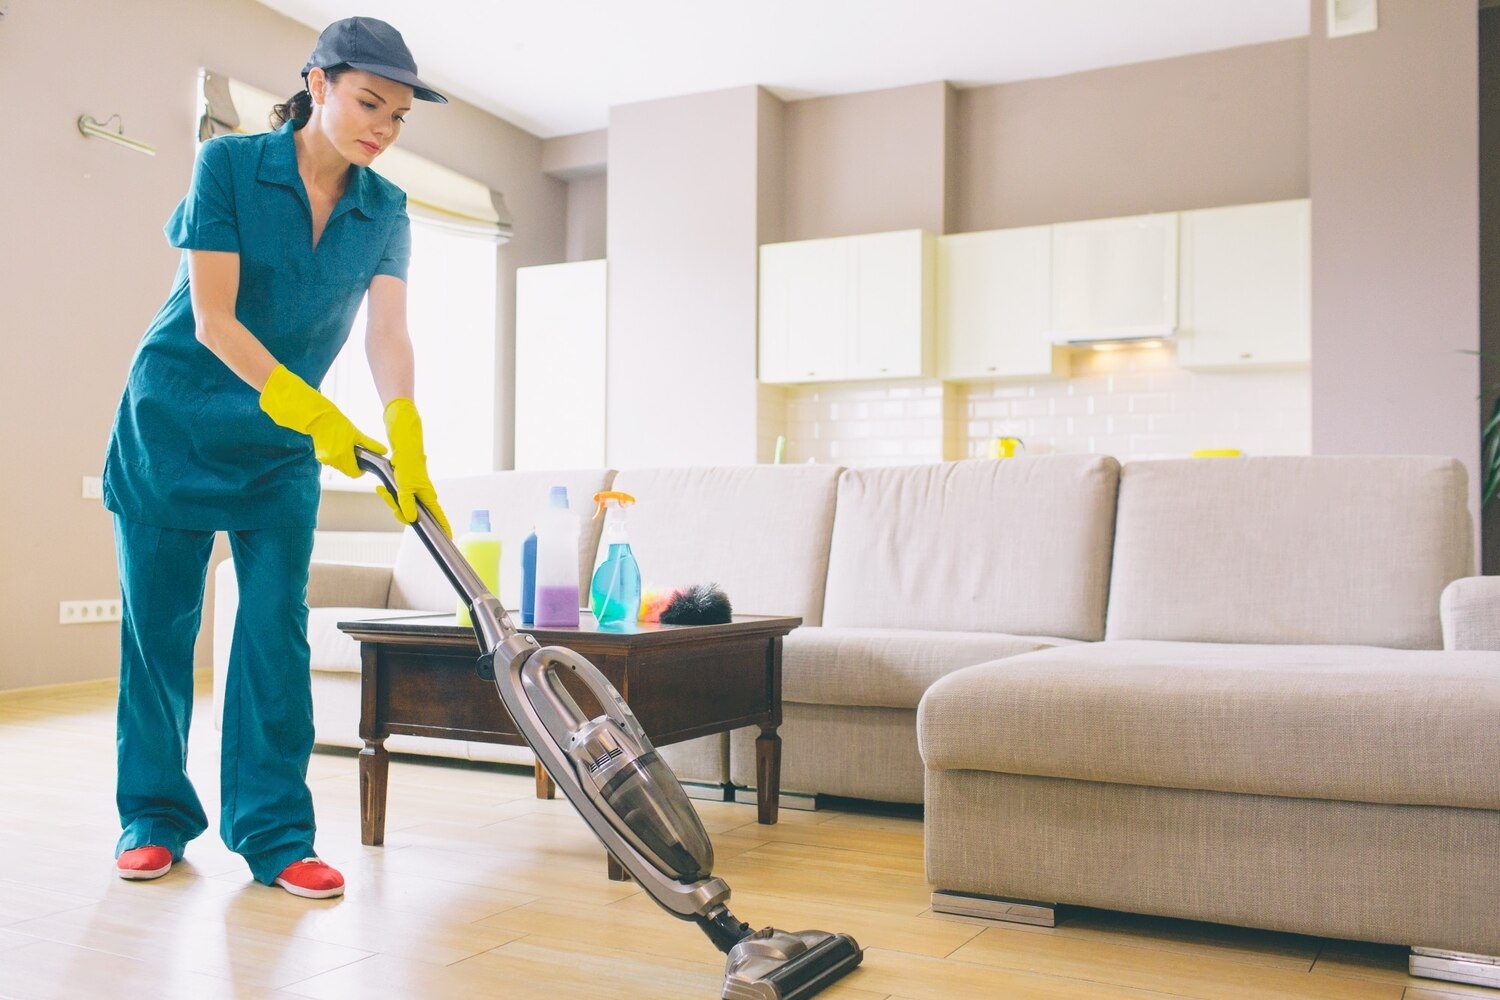 girl-is-walking-studio-apartment-cleaning-floor-with-vacuum-cleaner-she-holds-it-with-both-hands-woman-is-alone_152404-8720-transformed